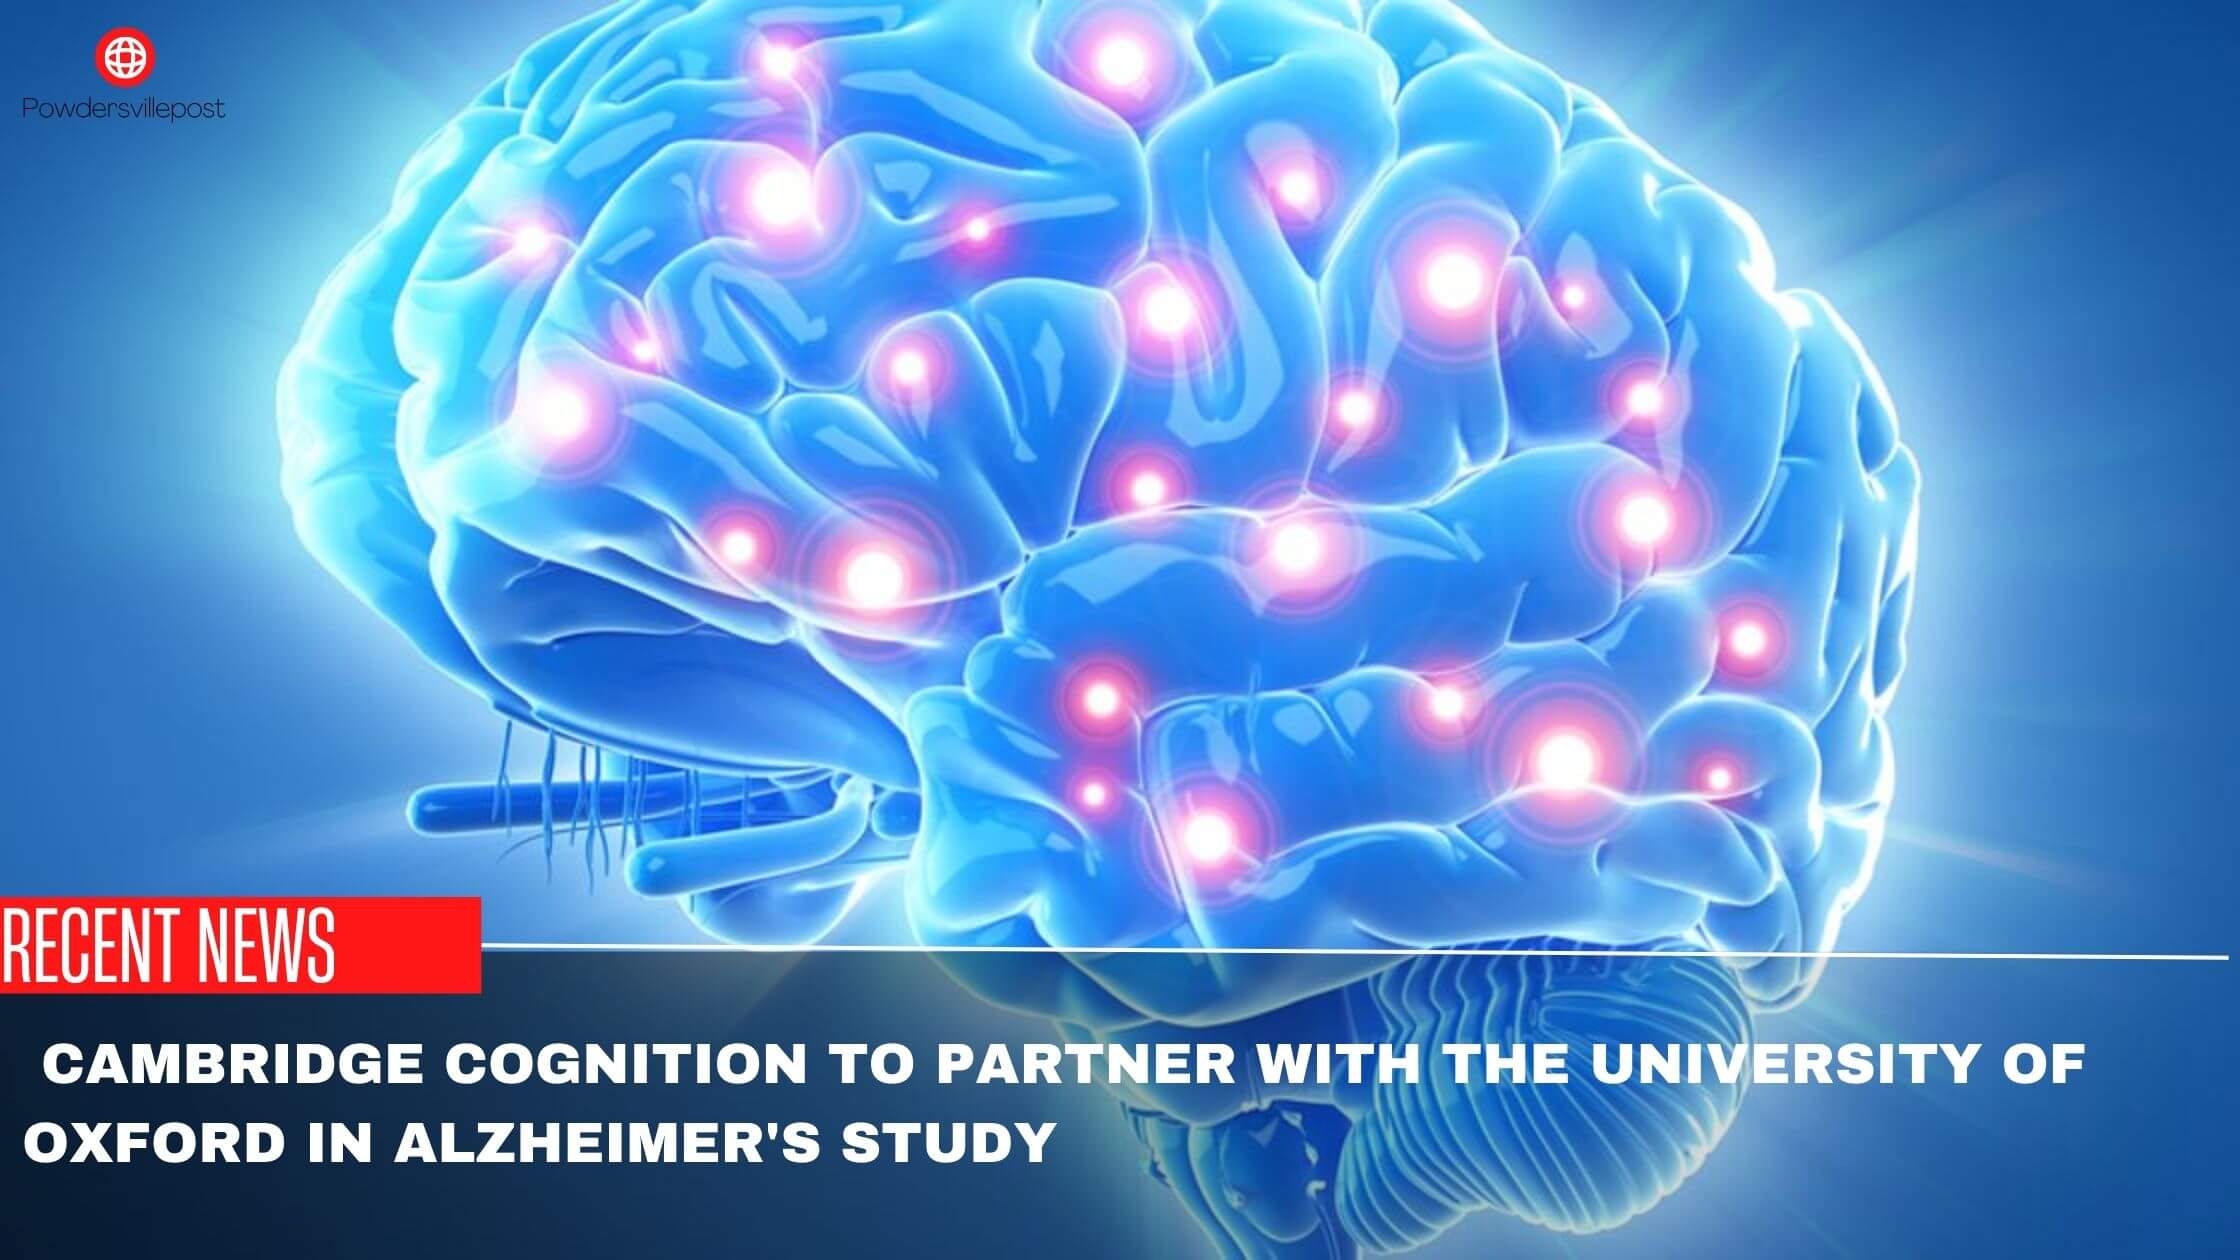  Cambridge Cognition To Partner With The University Of Oxford In Alzheimer's Study